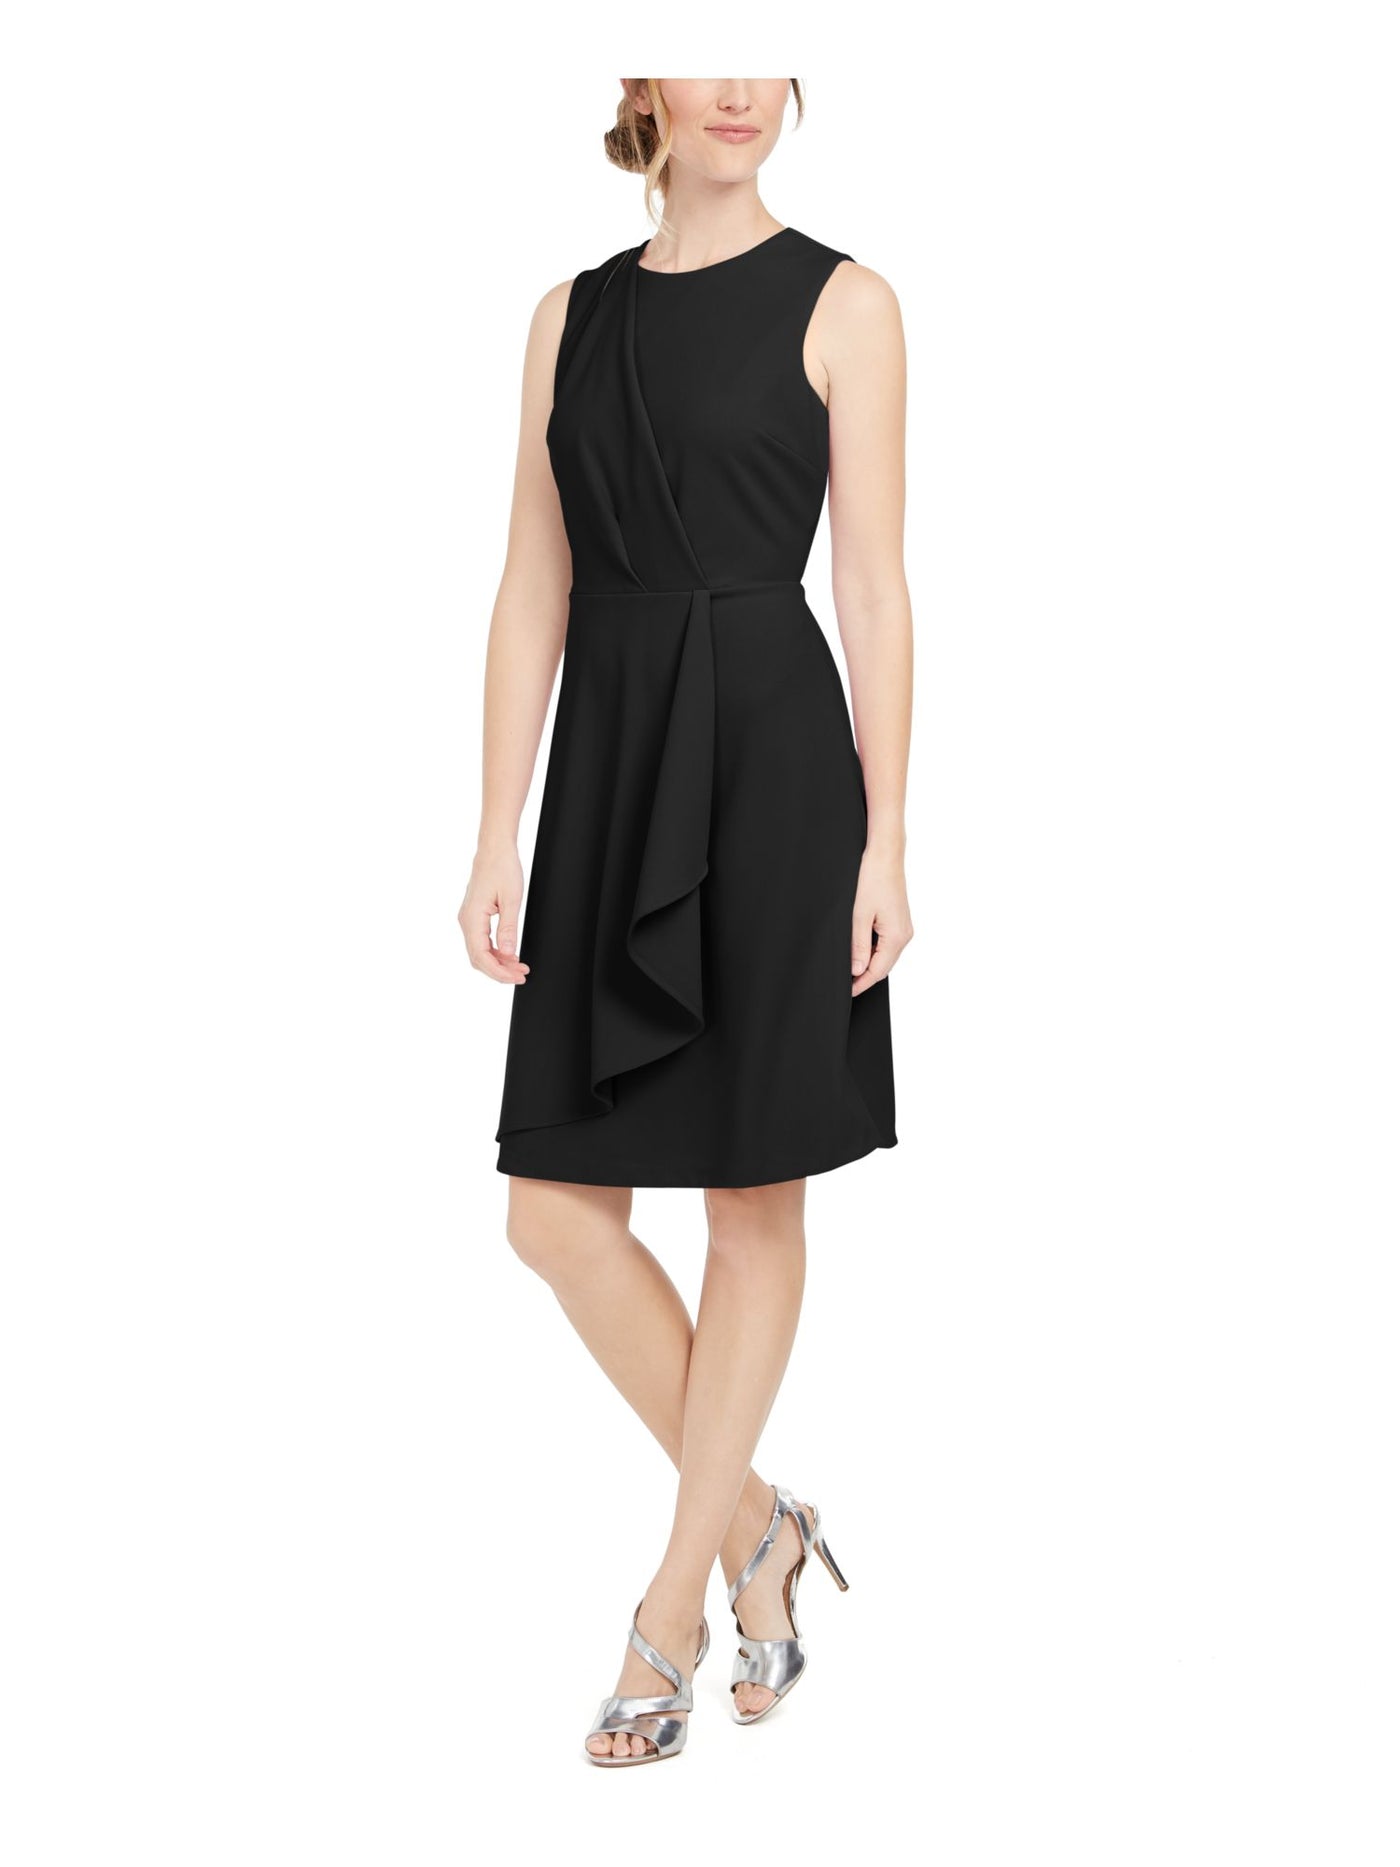 CALVIN KLEIN Womens Black Zippered Cascading Ruffle Sleeveless Crew Neck Above The Knee Cocktail Fit + Flare Dress 8